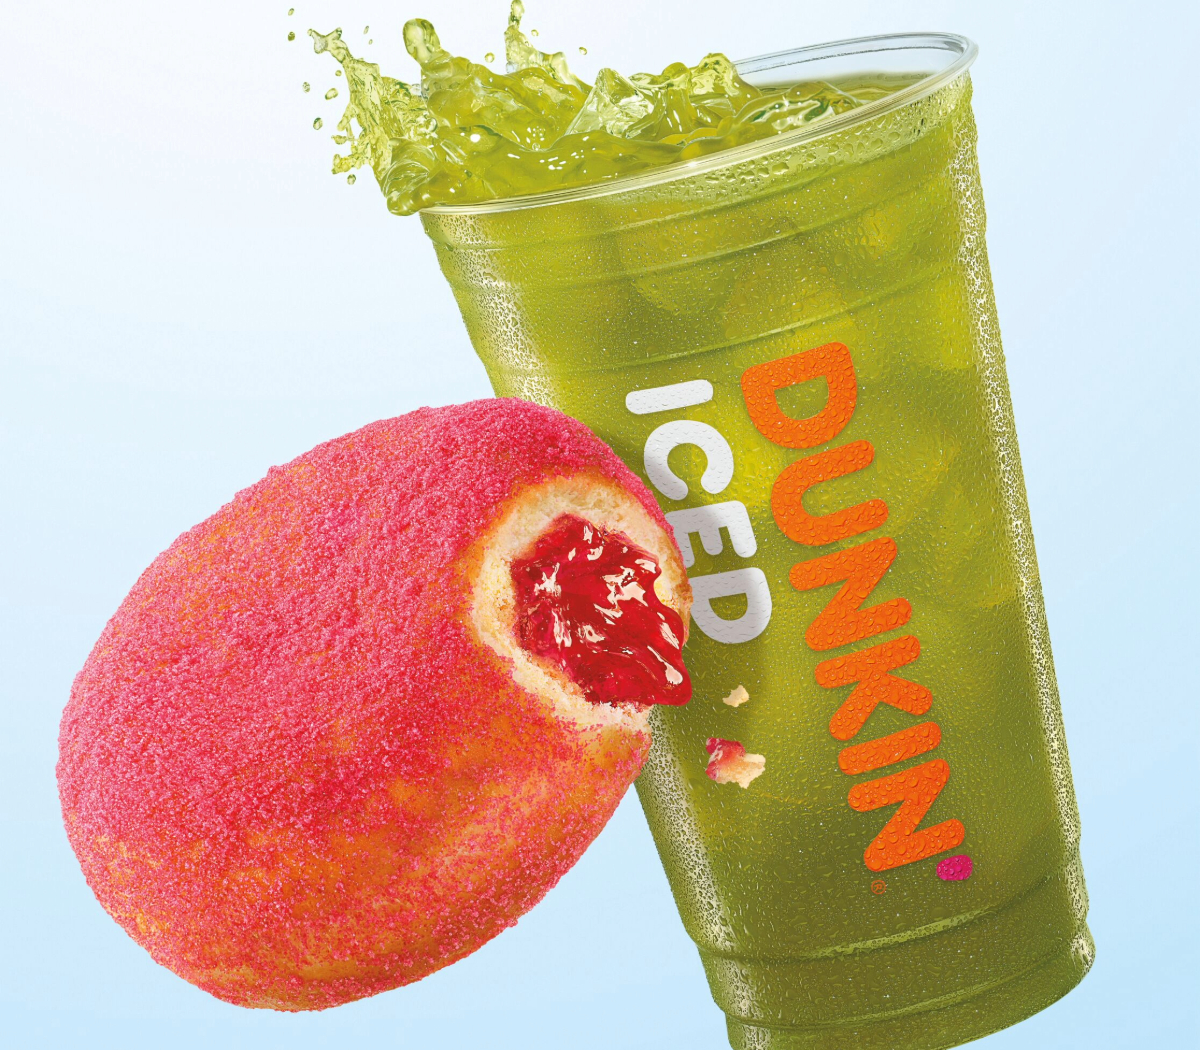 dunkin' launches new summer menu with long-awaited donut coffees